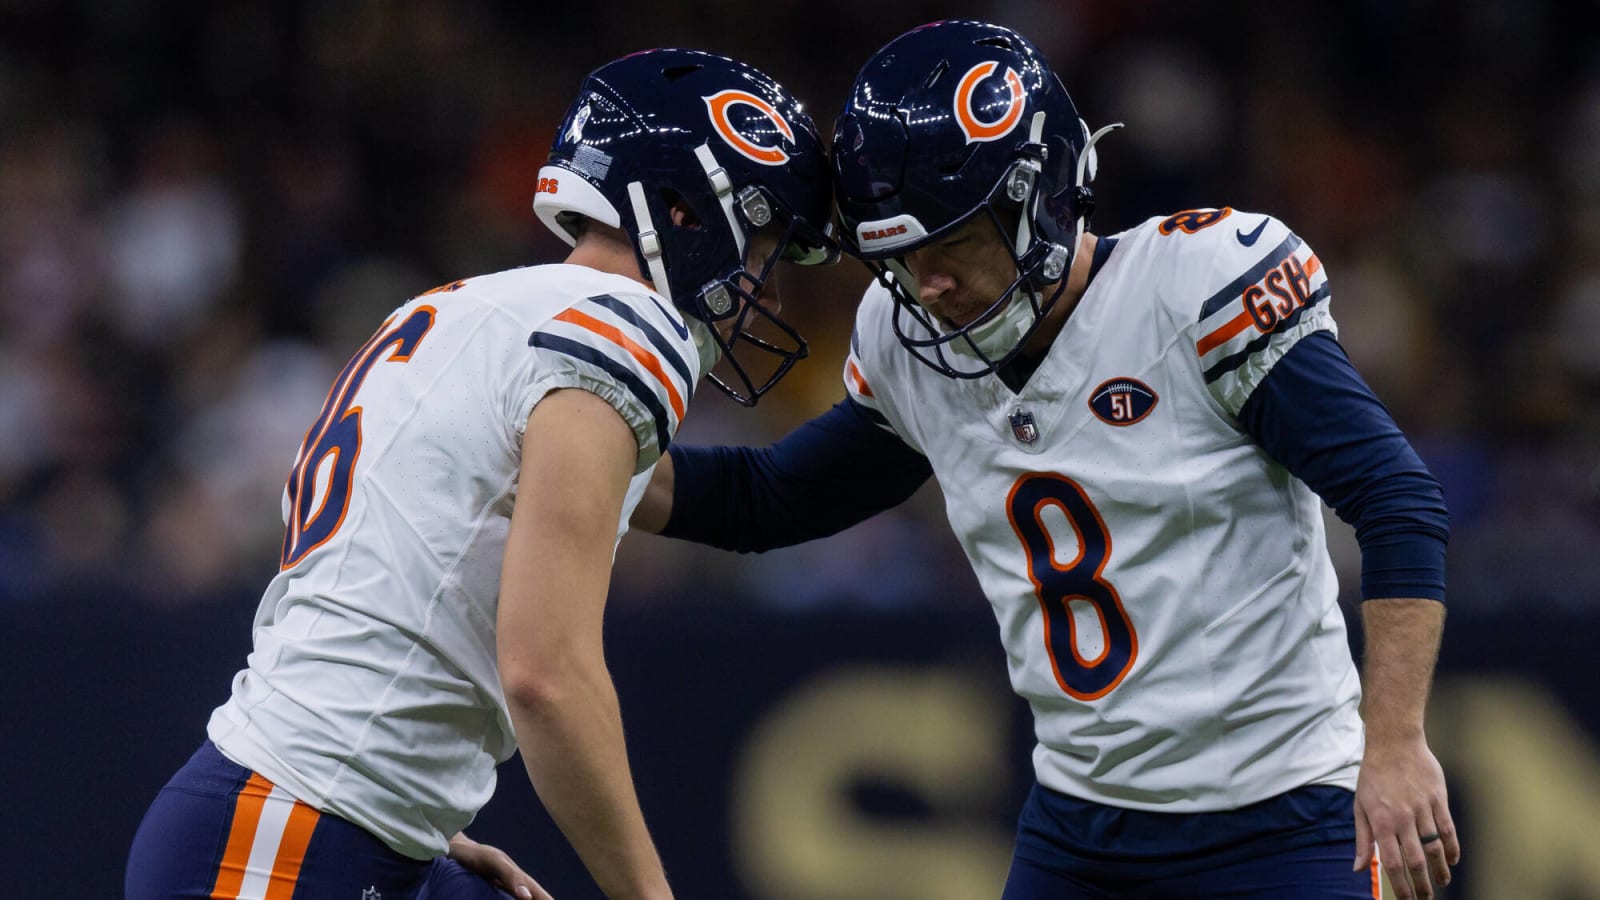  Chicago Bears cut 2-year starter after drafting replacement